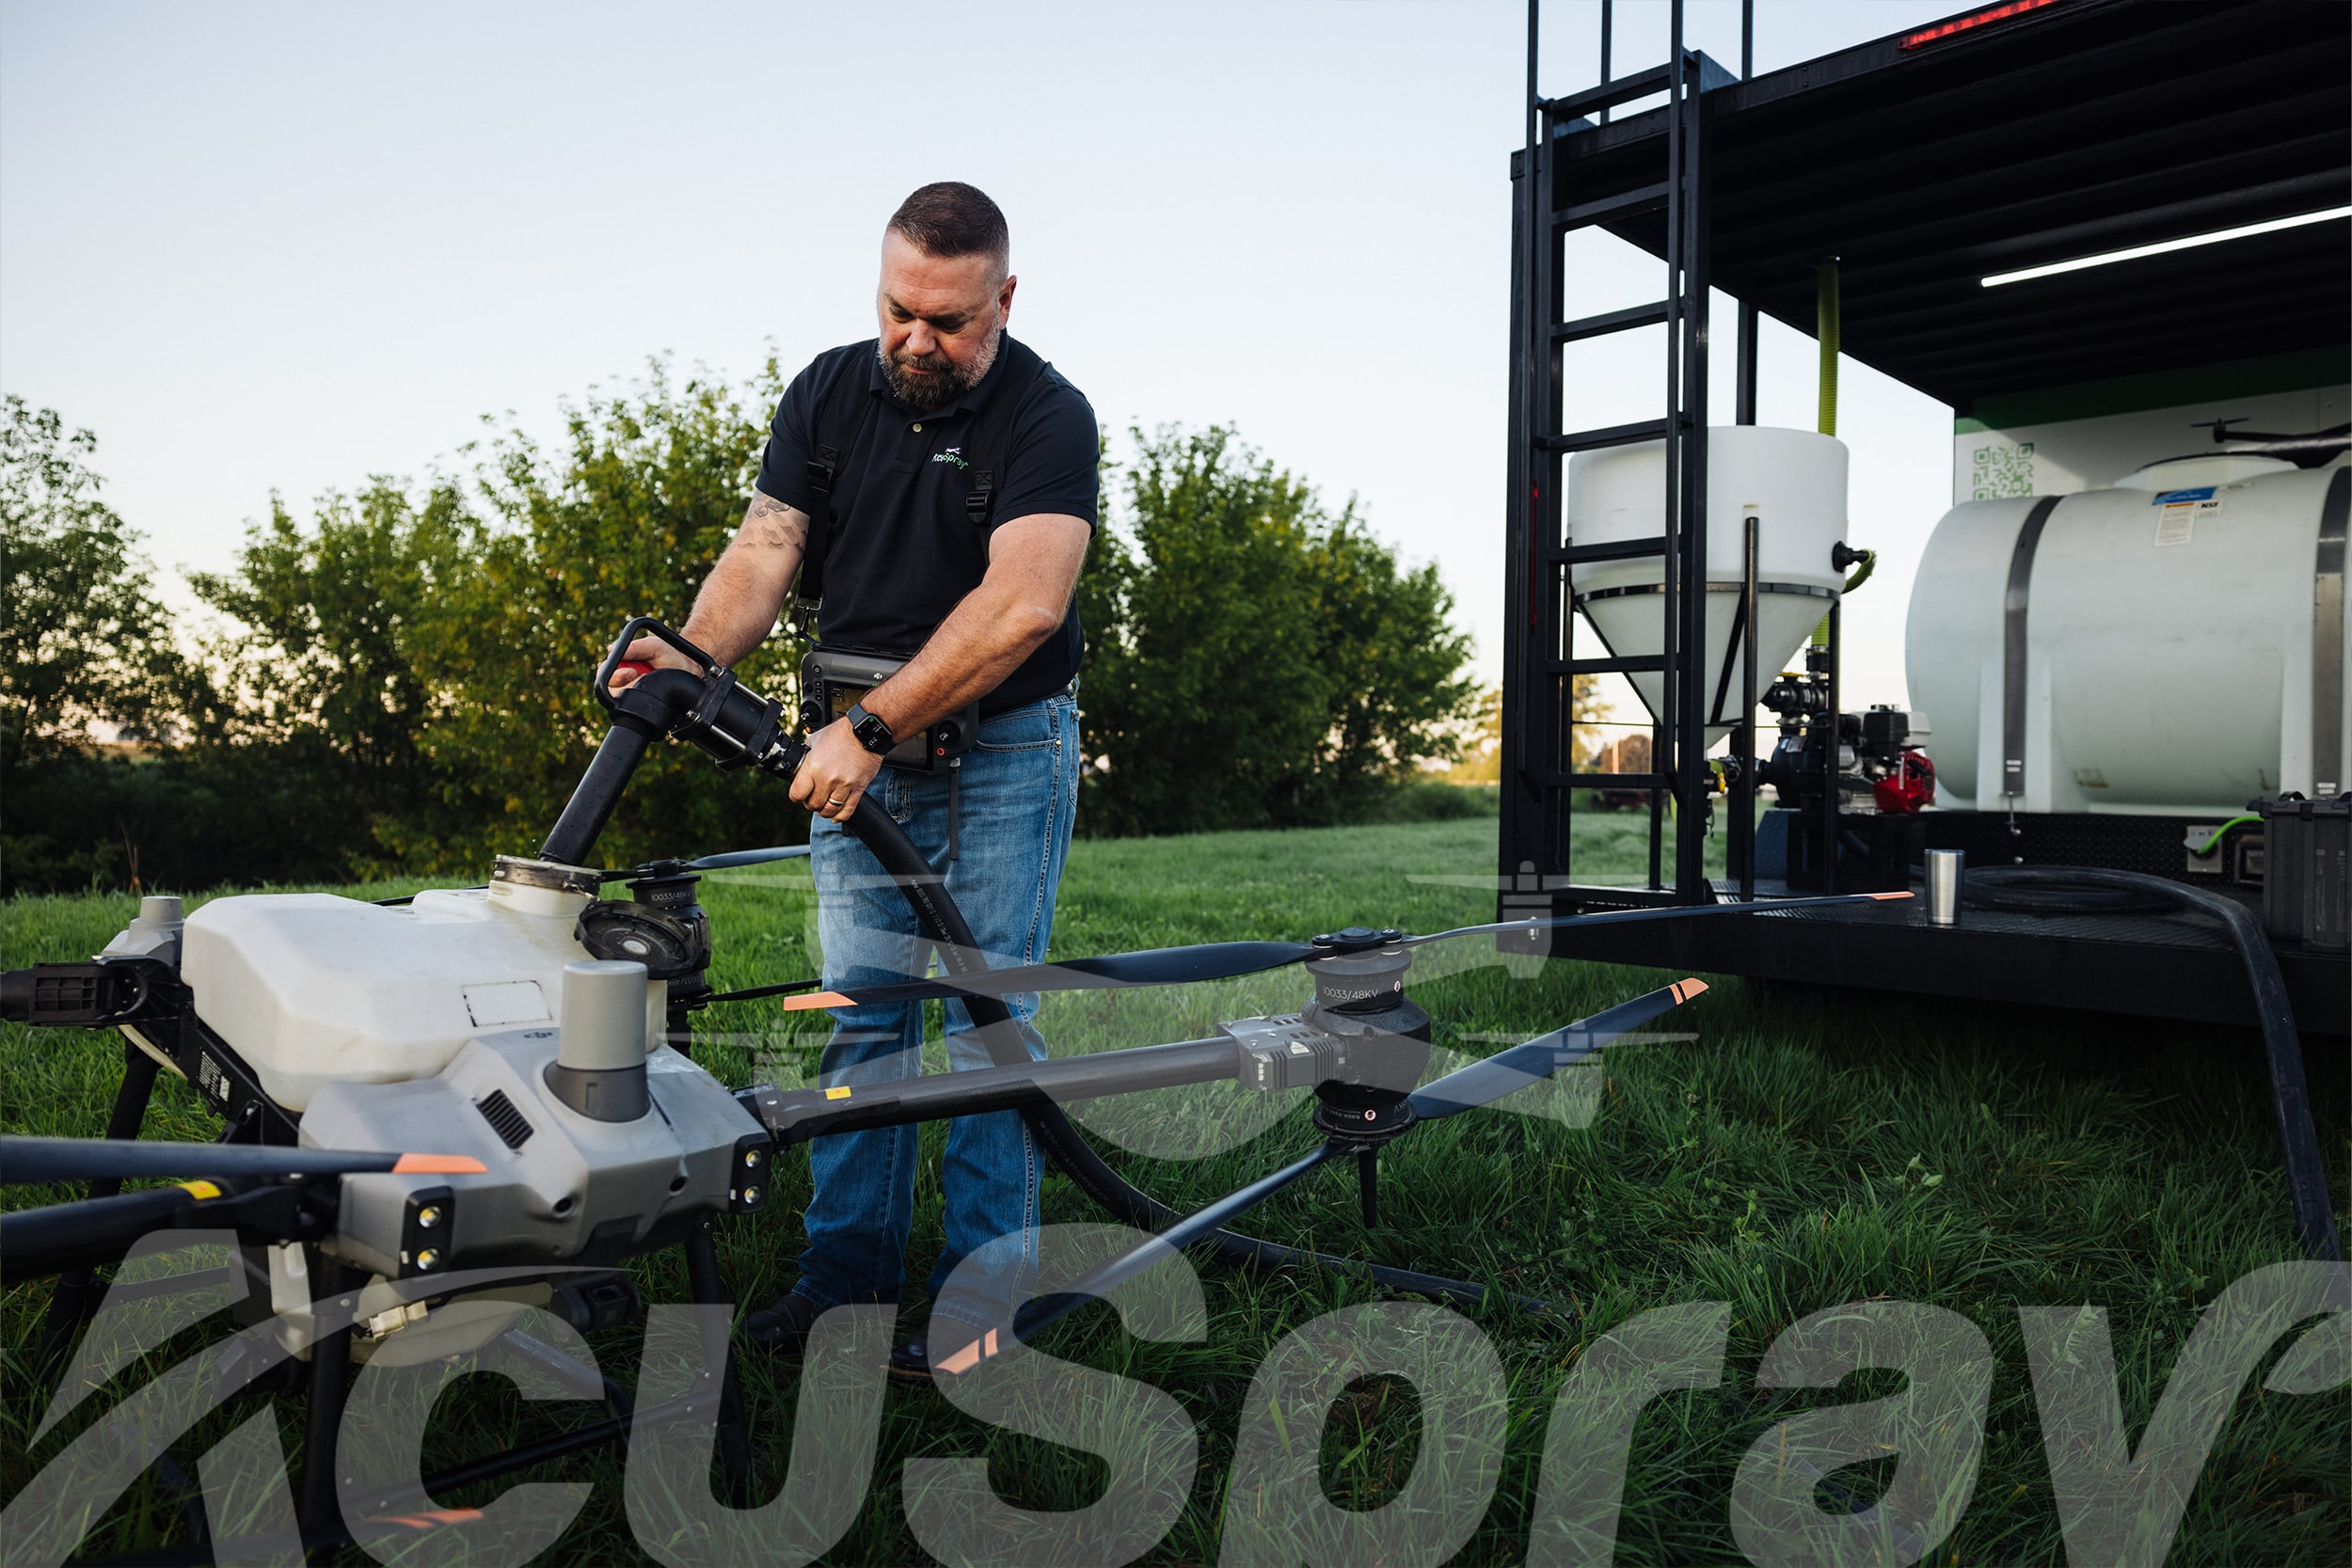 AcuSpray pilot setting up drone spraying services equipment for field treatment.